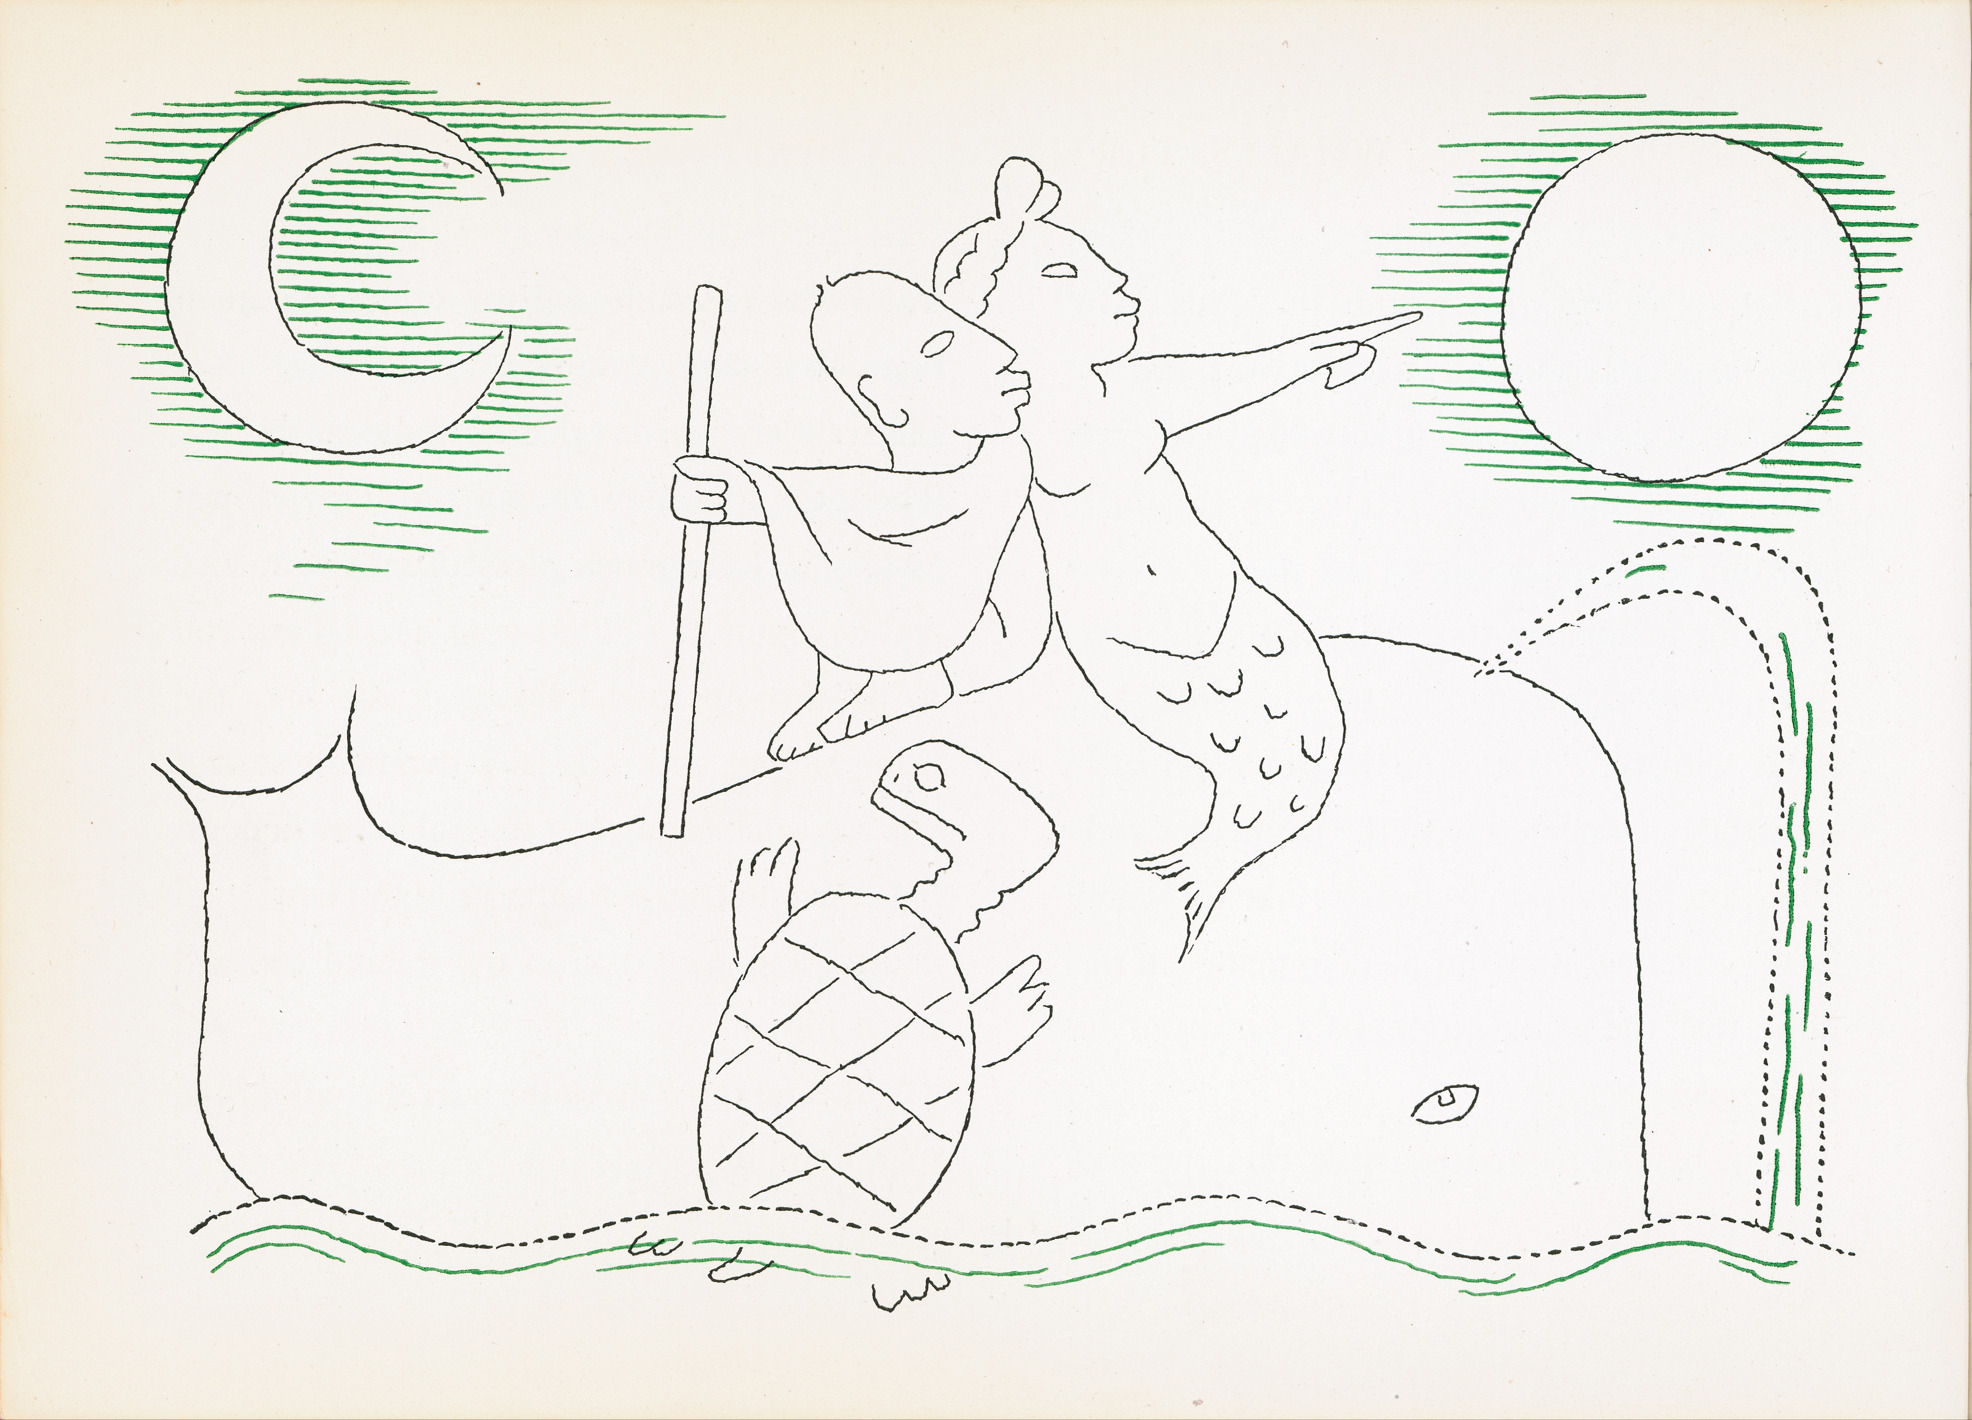 'Whales, turtles and mermaids' by Jean Charlot in 'The Sun, the Moon and a Rabbit' written by Amelia Martinez del Rio.